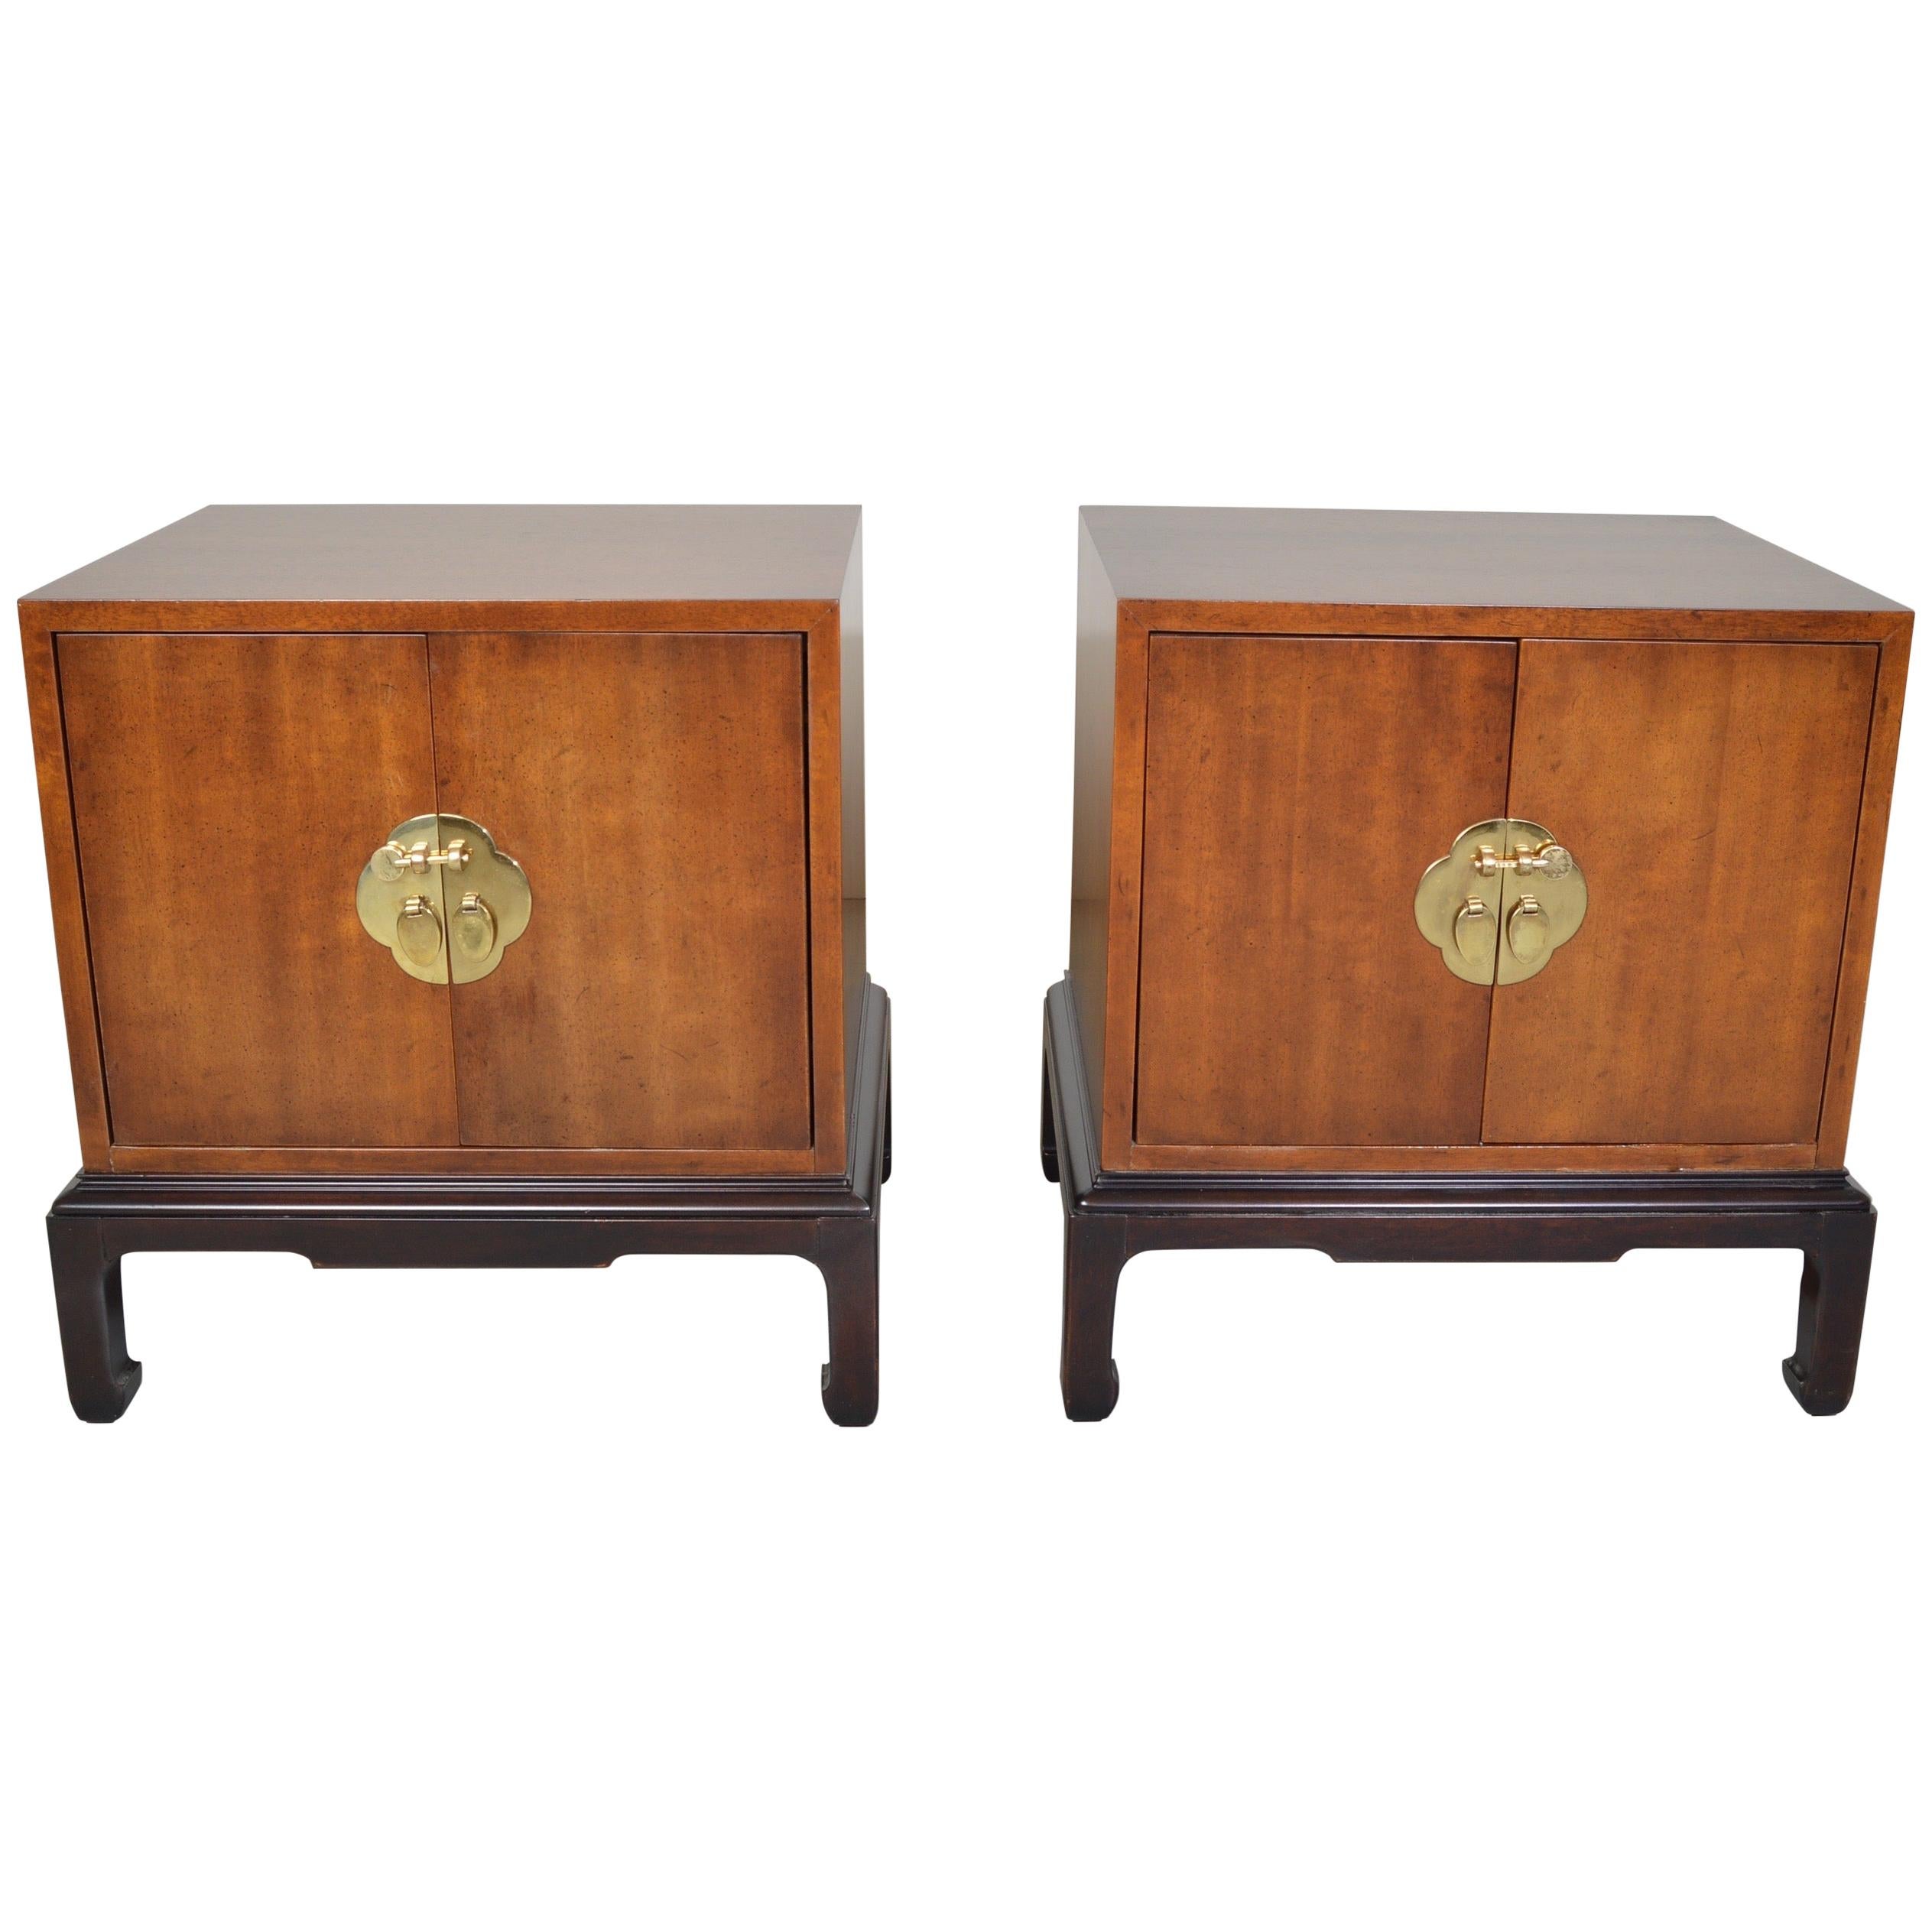 Michael Taylor HENREDON Pan Asian Chinoiserie Nightstands Bedside Cabinets